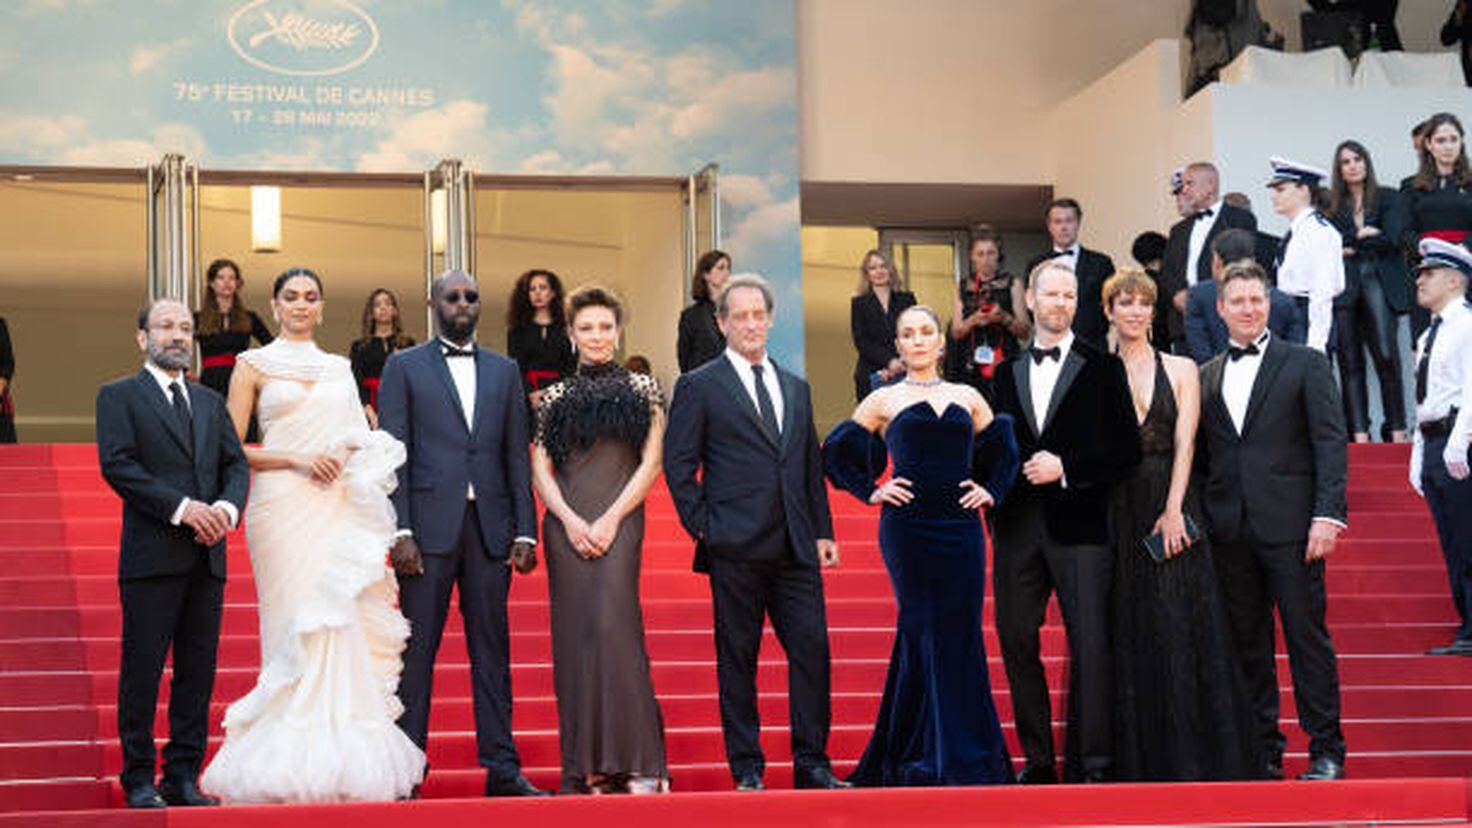 2022 Cannes Film Festival closing ceremony Award winners and